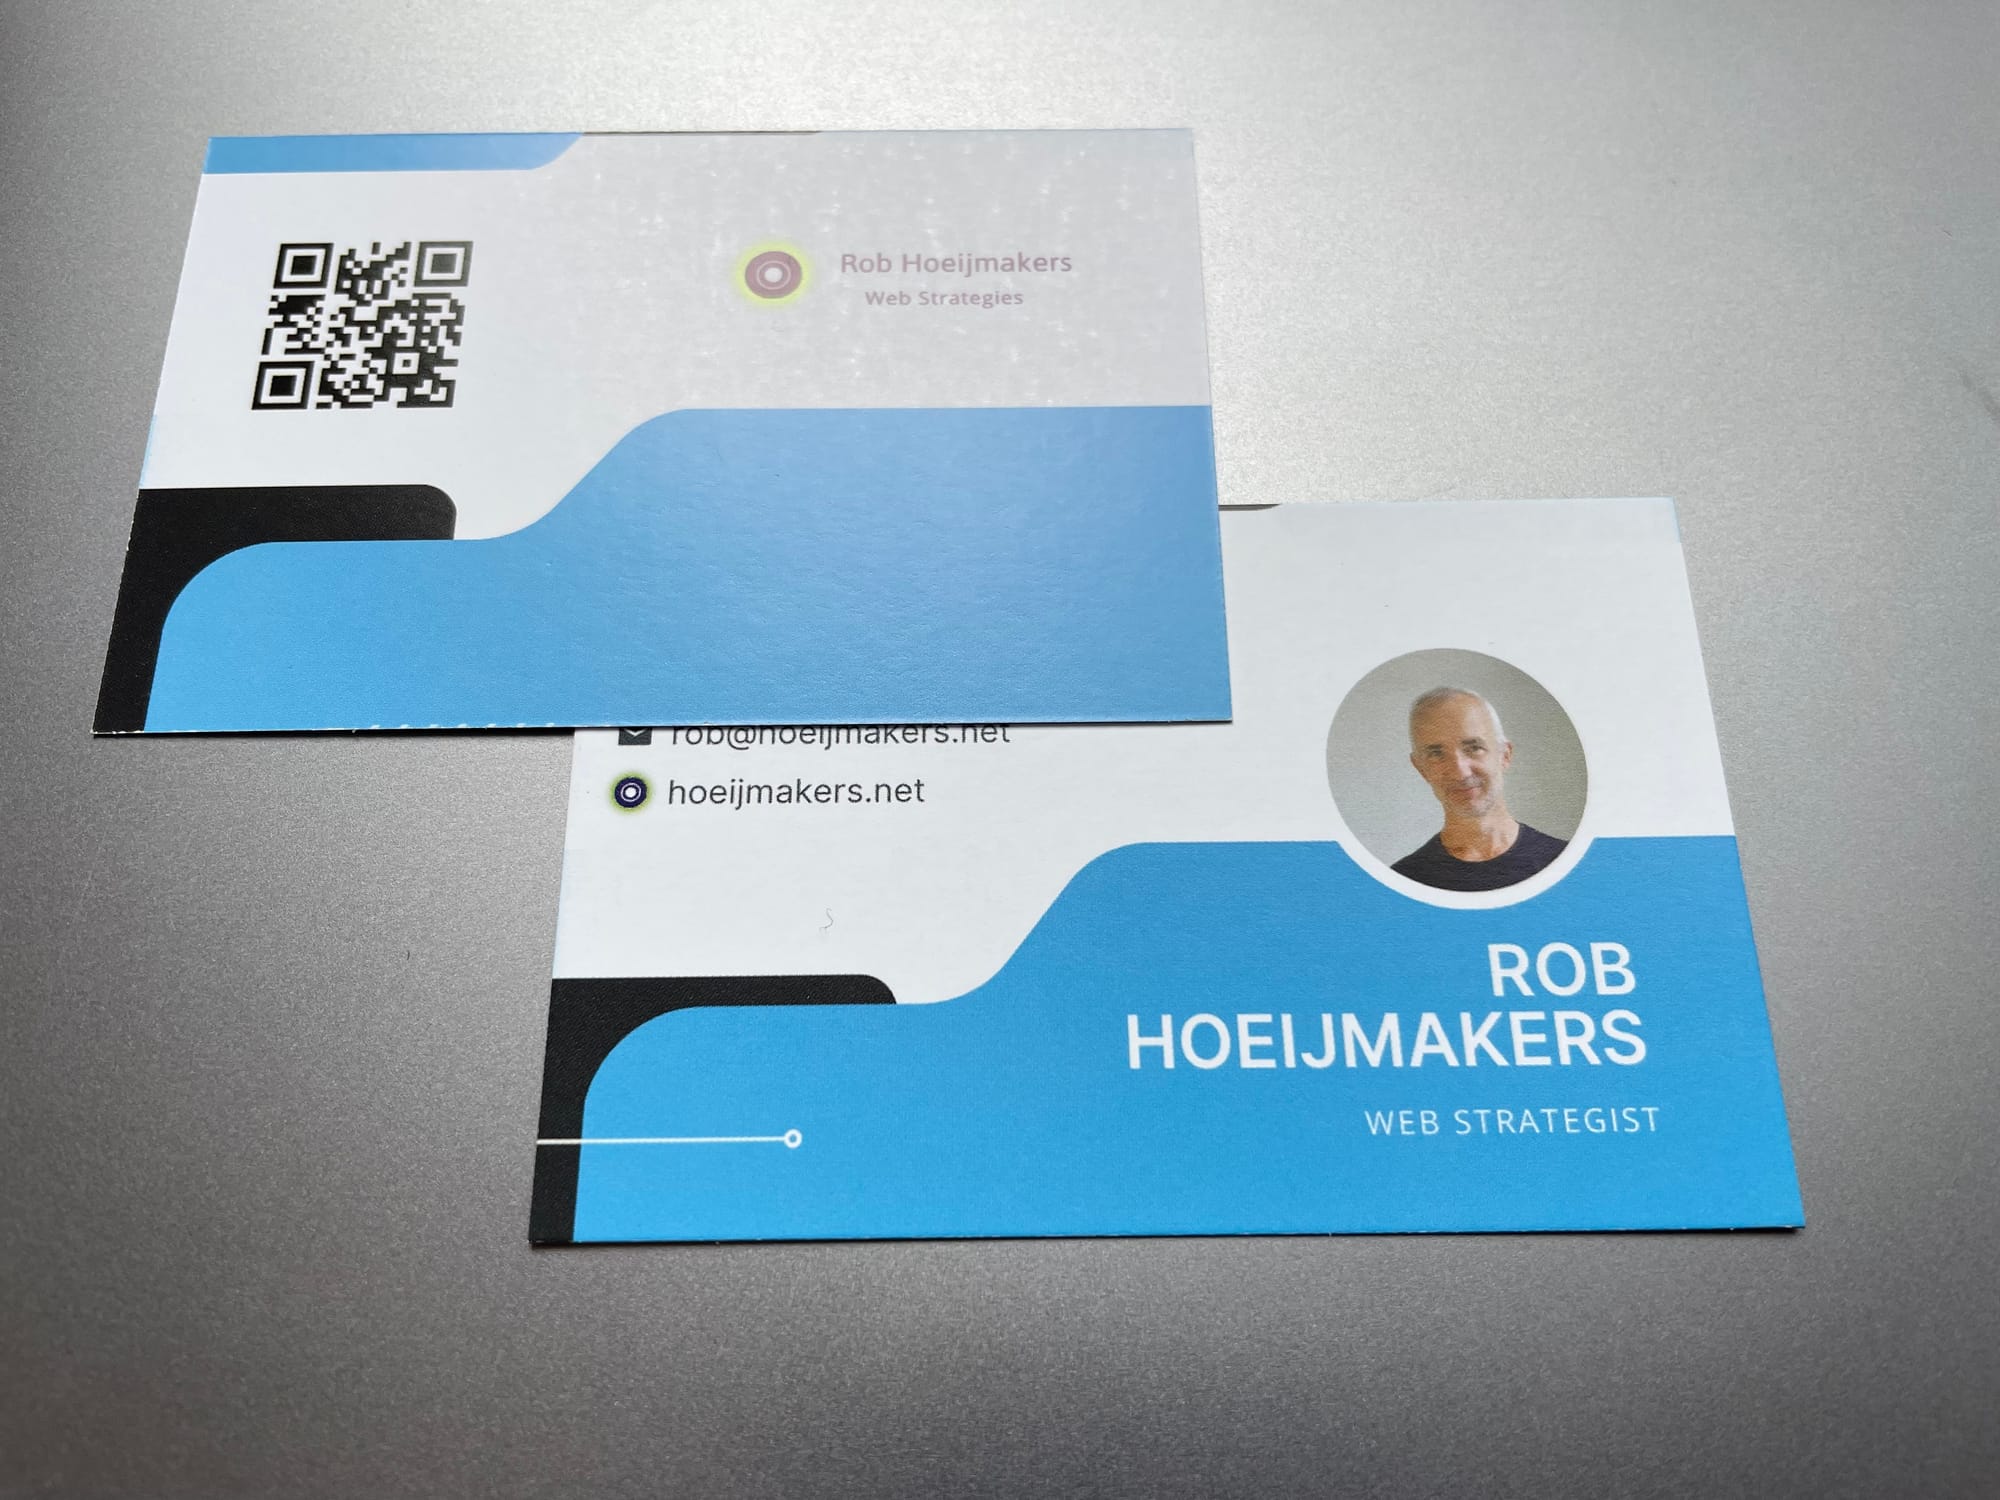 Business Cards in a Digital World